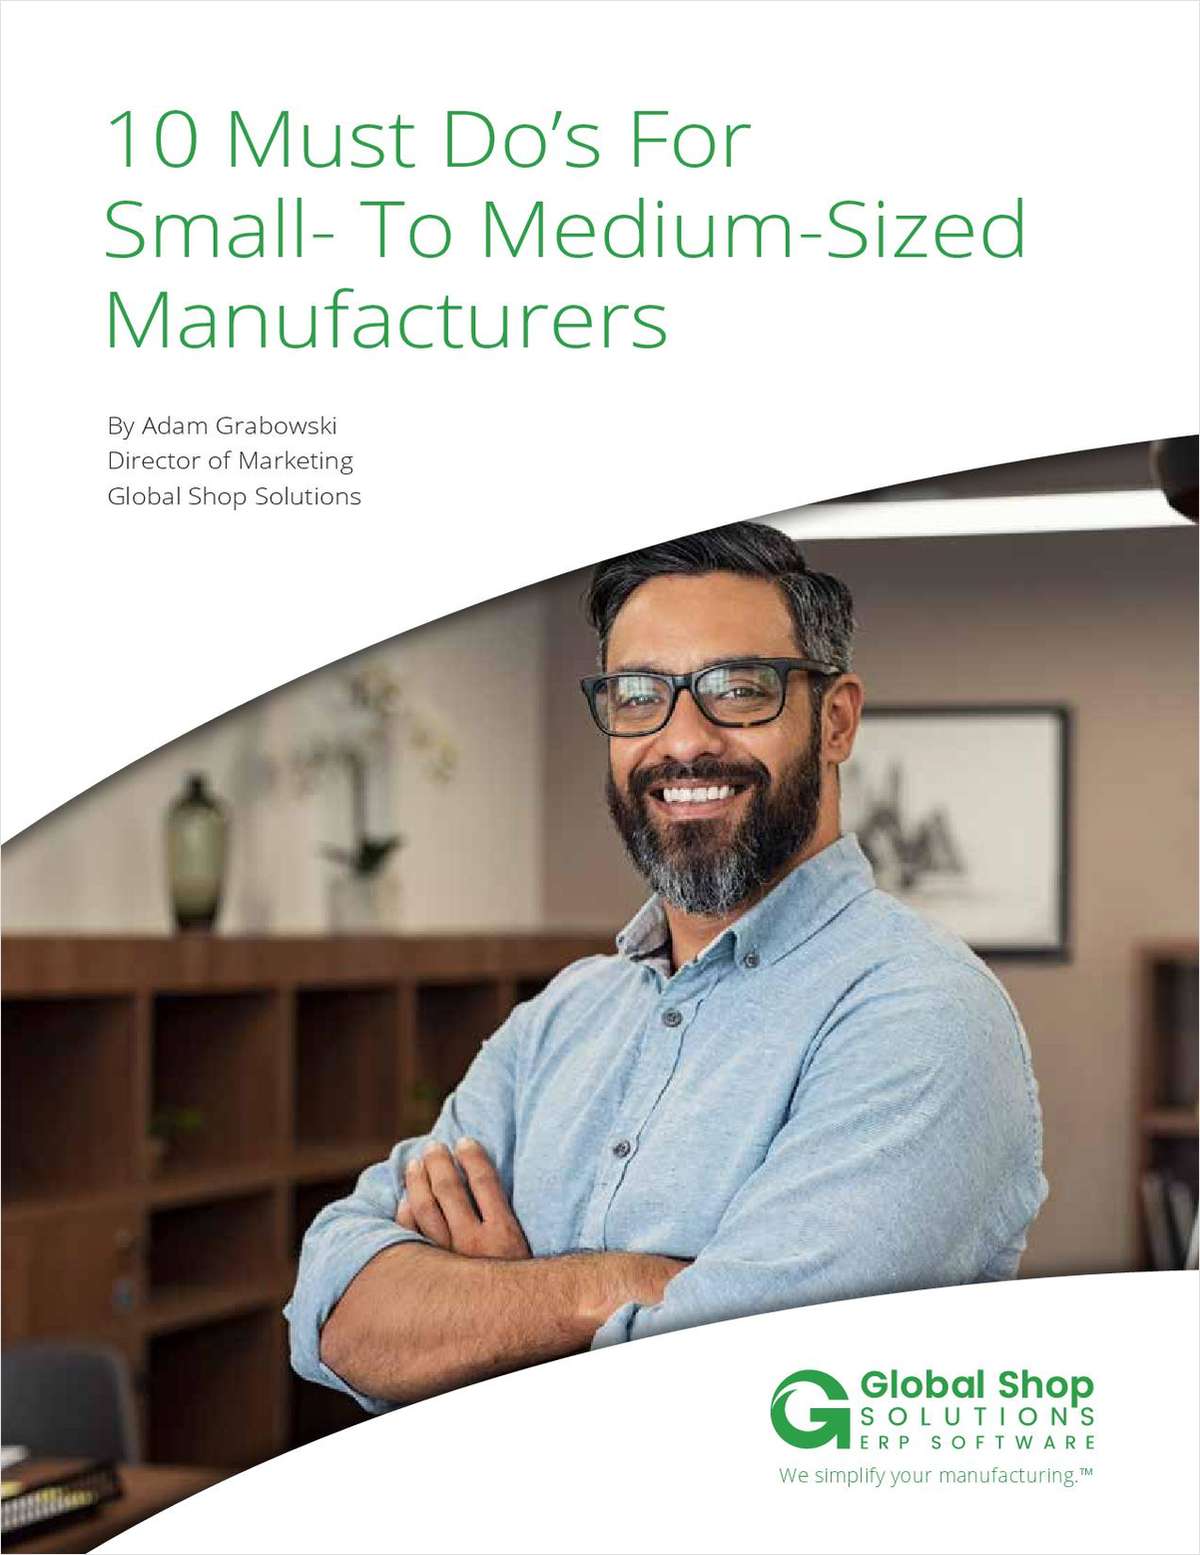 10 Must Do's For Small to Medium-Sized Manufacturers